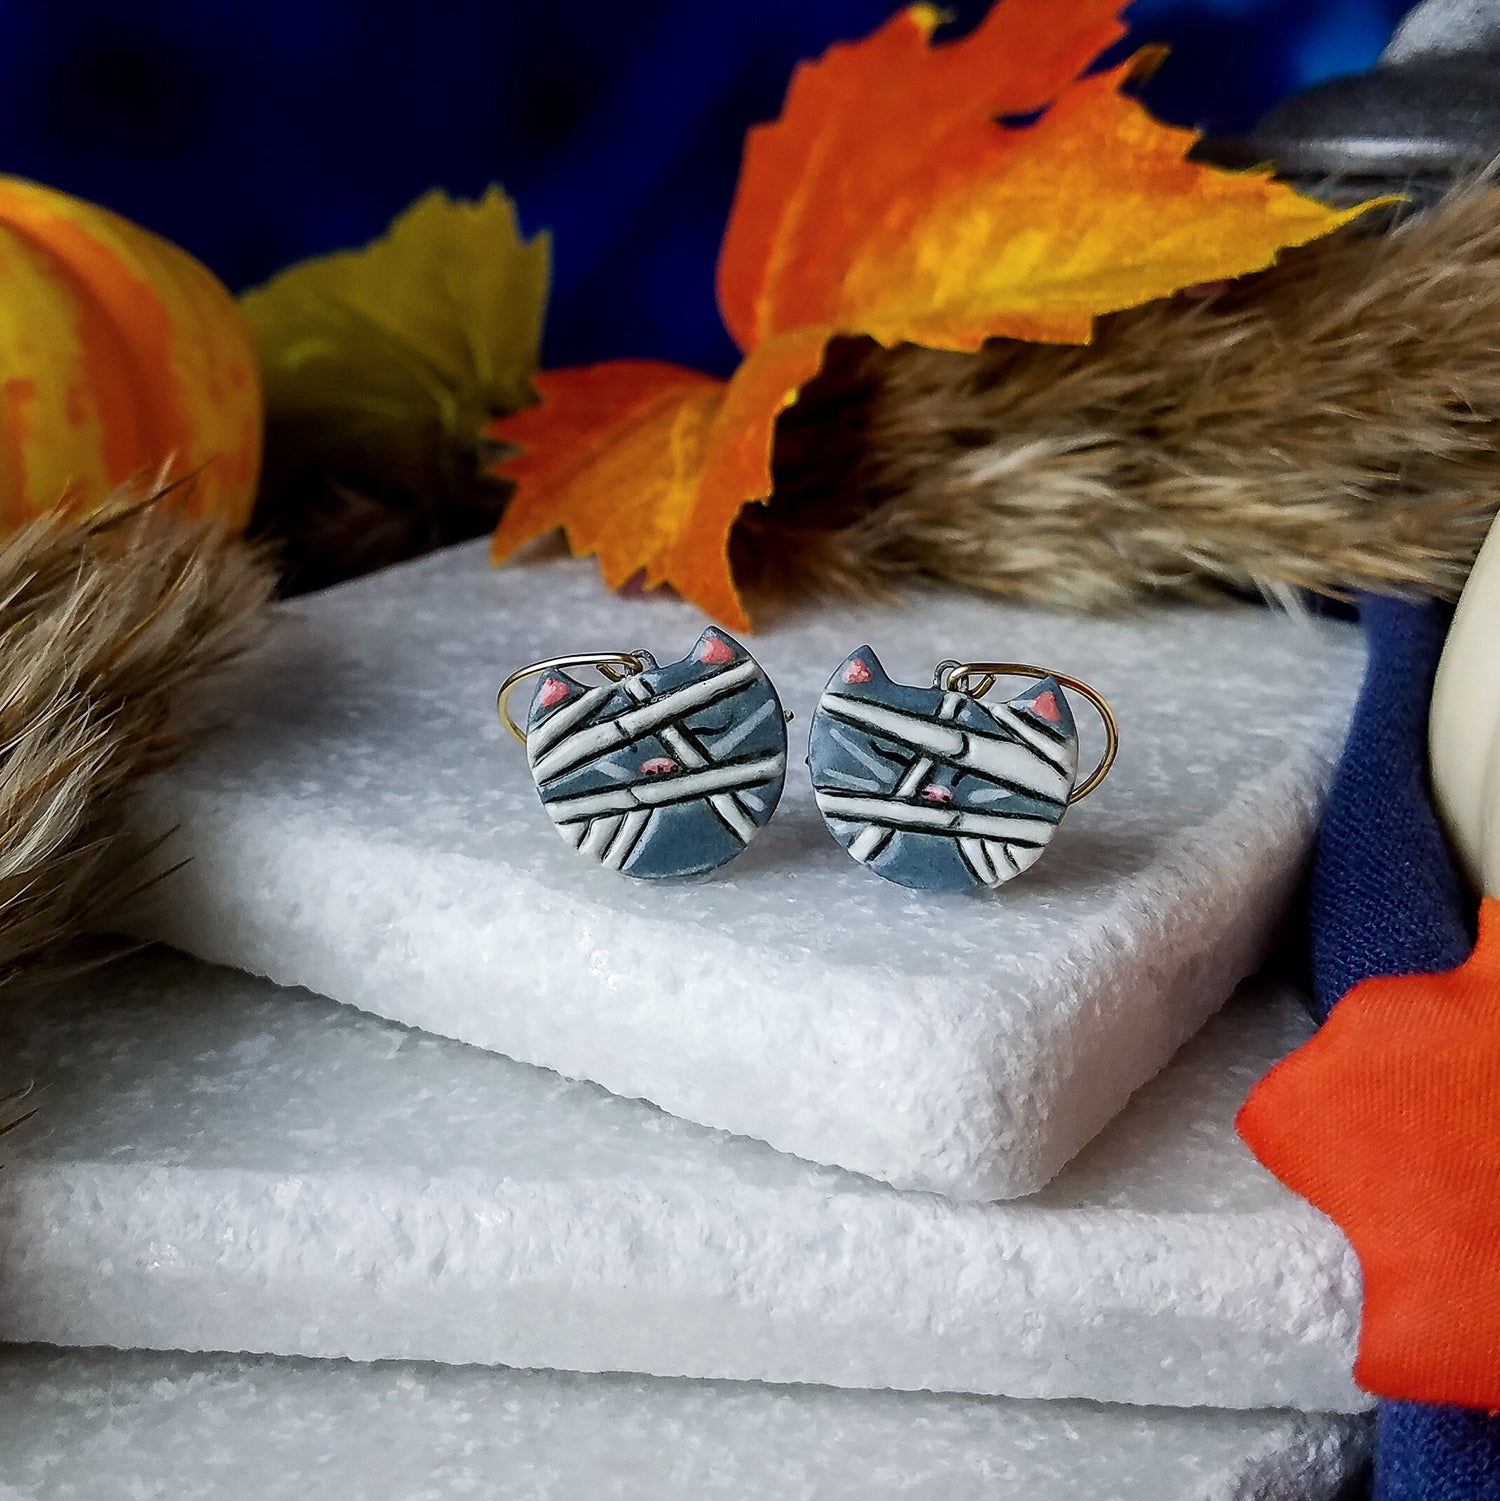 Porcelain cat heads sculpted and painted as Meowmies/Mummies complete with wrappings and happy features on gold-filled curved ear wires.  Earrings are on a stack of white marble blocks, surrounded by Autumnal items – leaves, pumpkins, and dried grasses – with a blue night sky background.